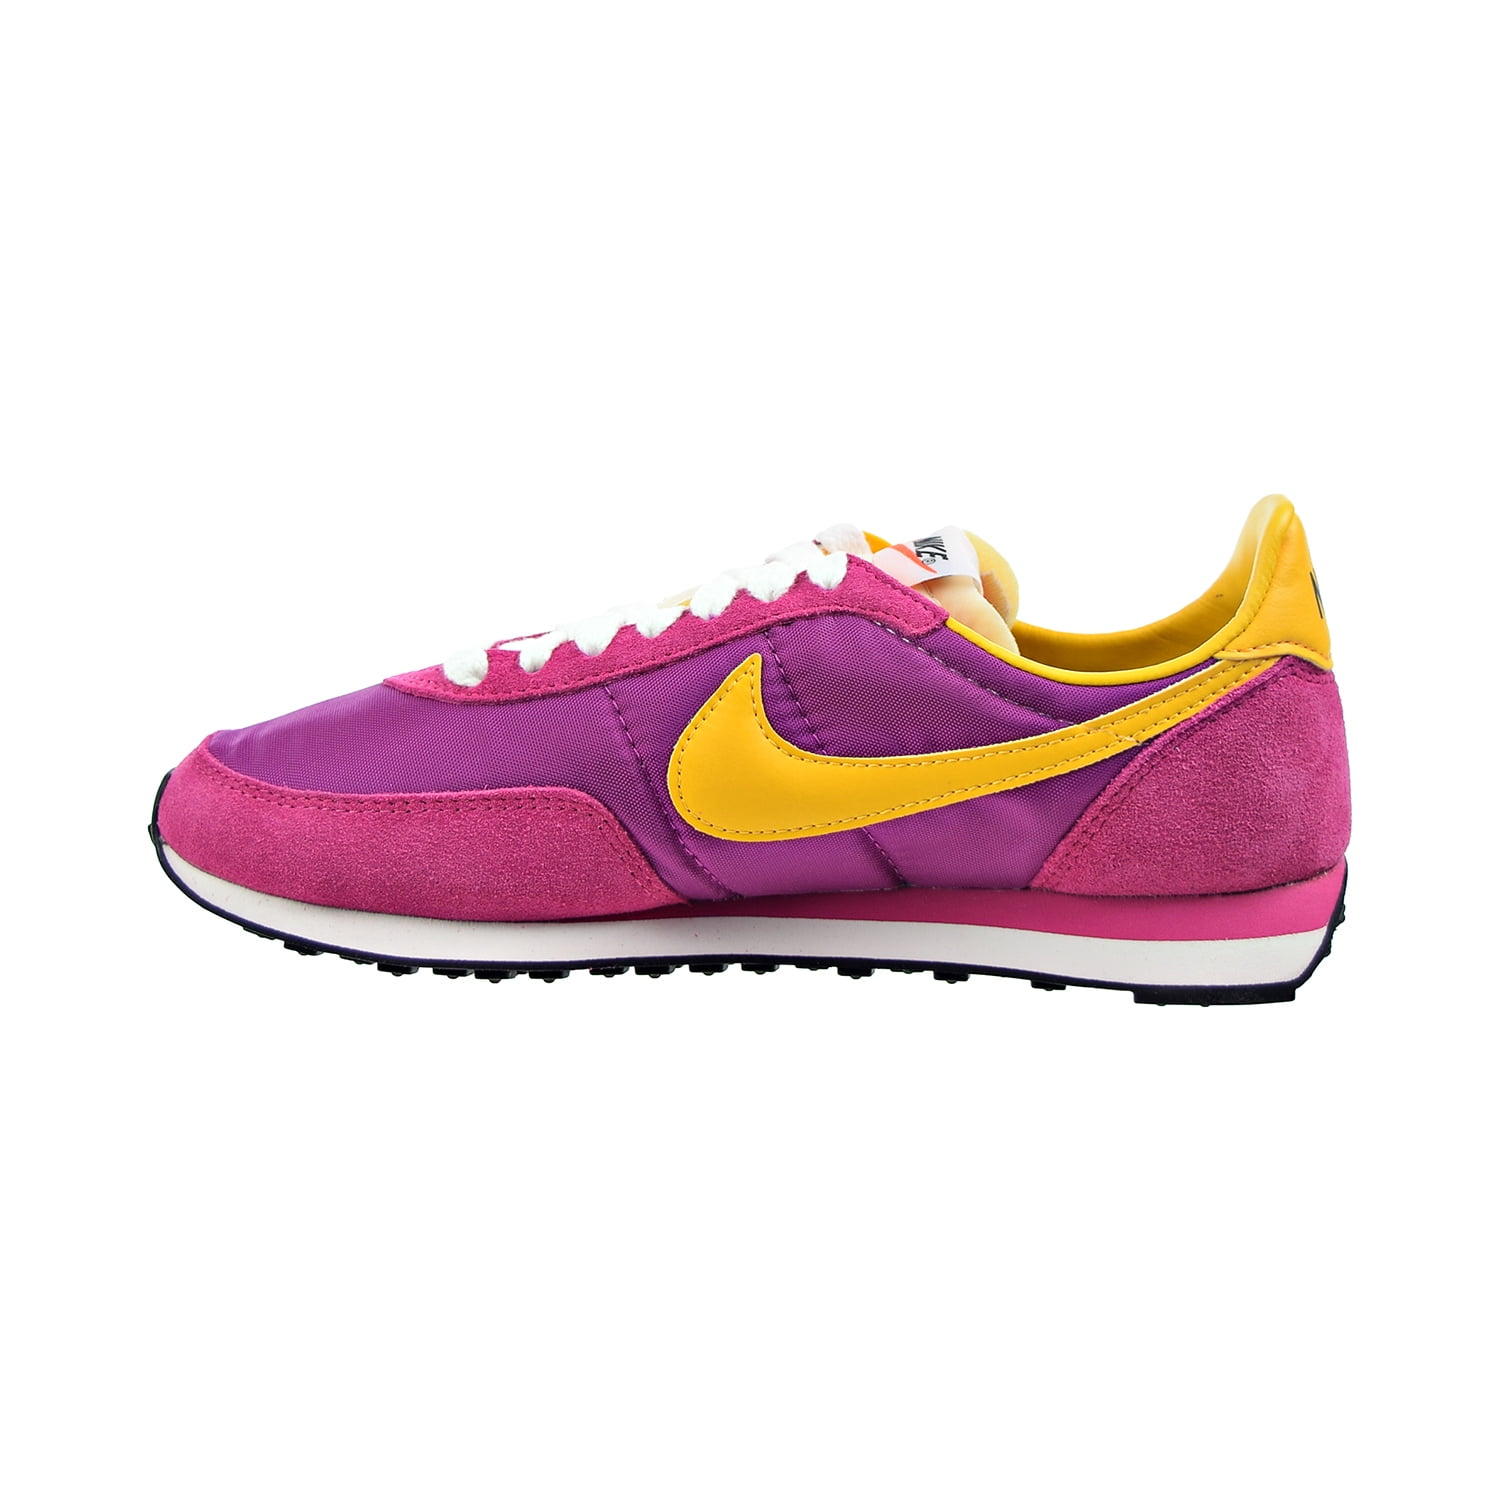 Nike Waffle Trainer 2 SP Men's Shoes Fireberry-Cactus Flower 